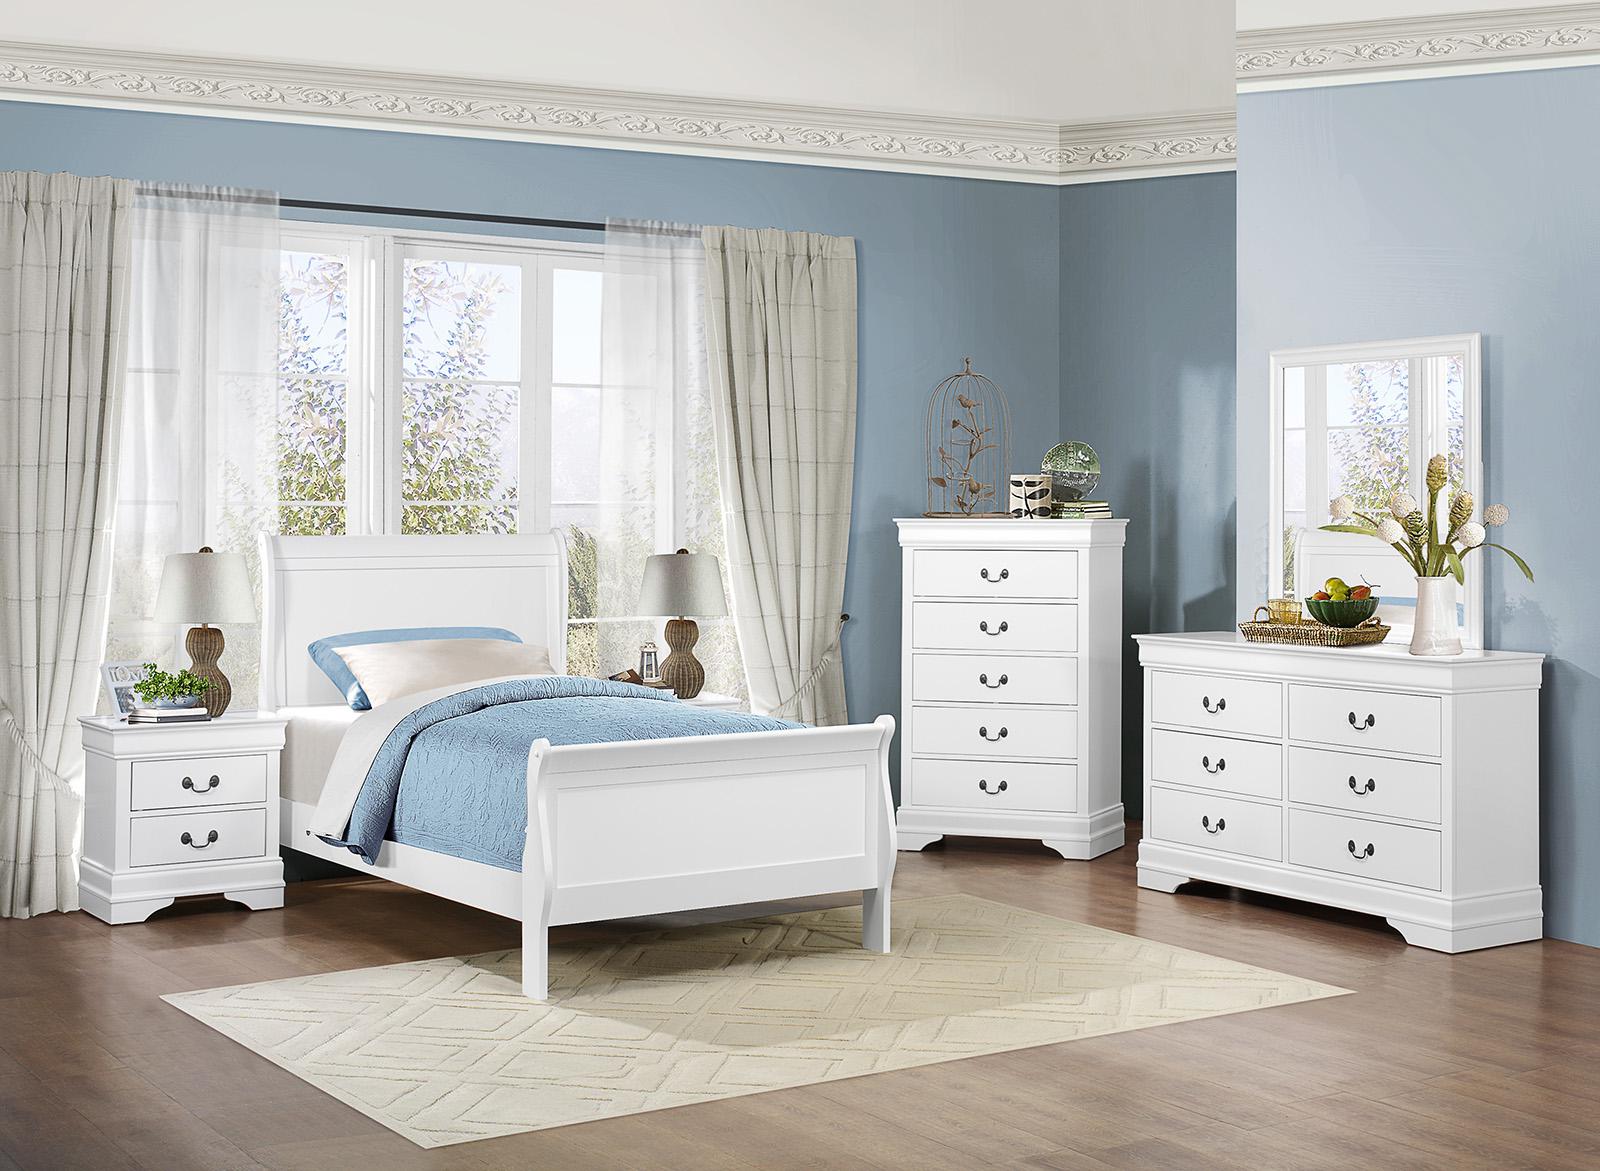 Homelegance Mayville Twin Sleigh Bed in White